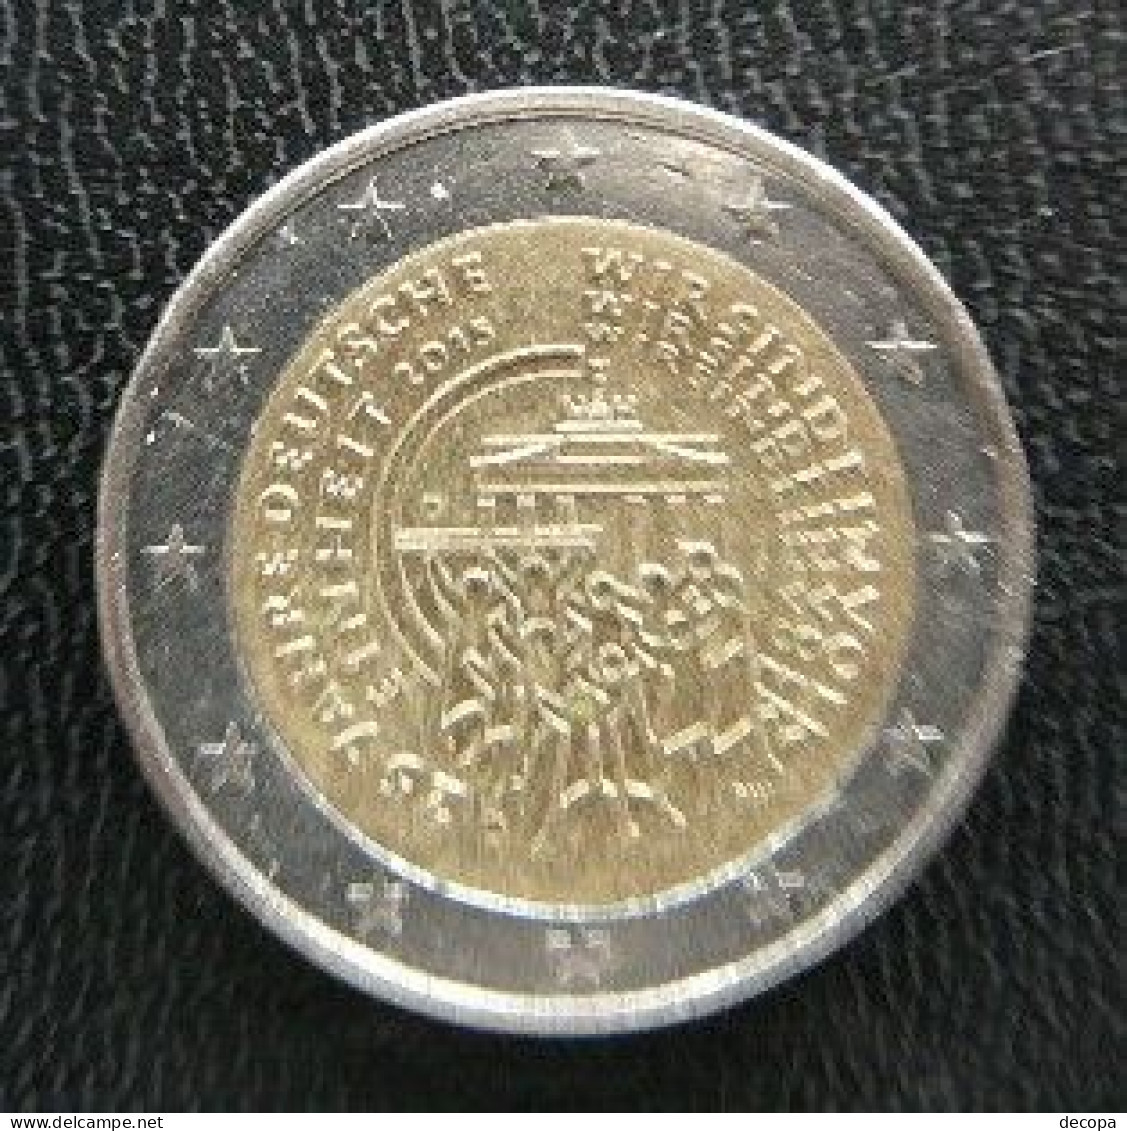 Germany - Allemagne - Duitsland   2 EURO 2015  D      Speciale Uitgave - Commemorative - Germany